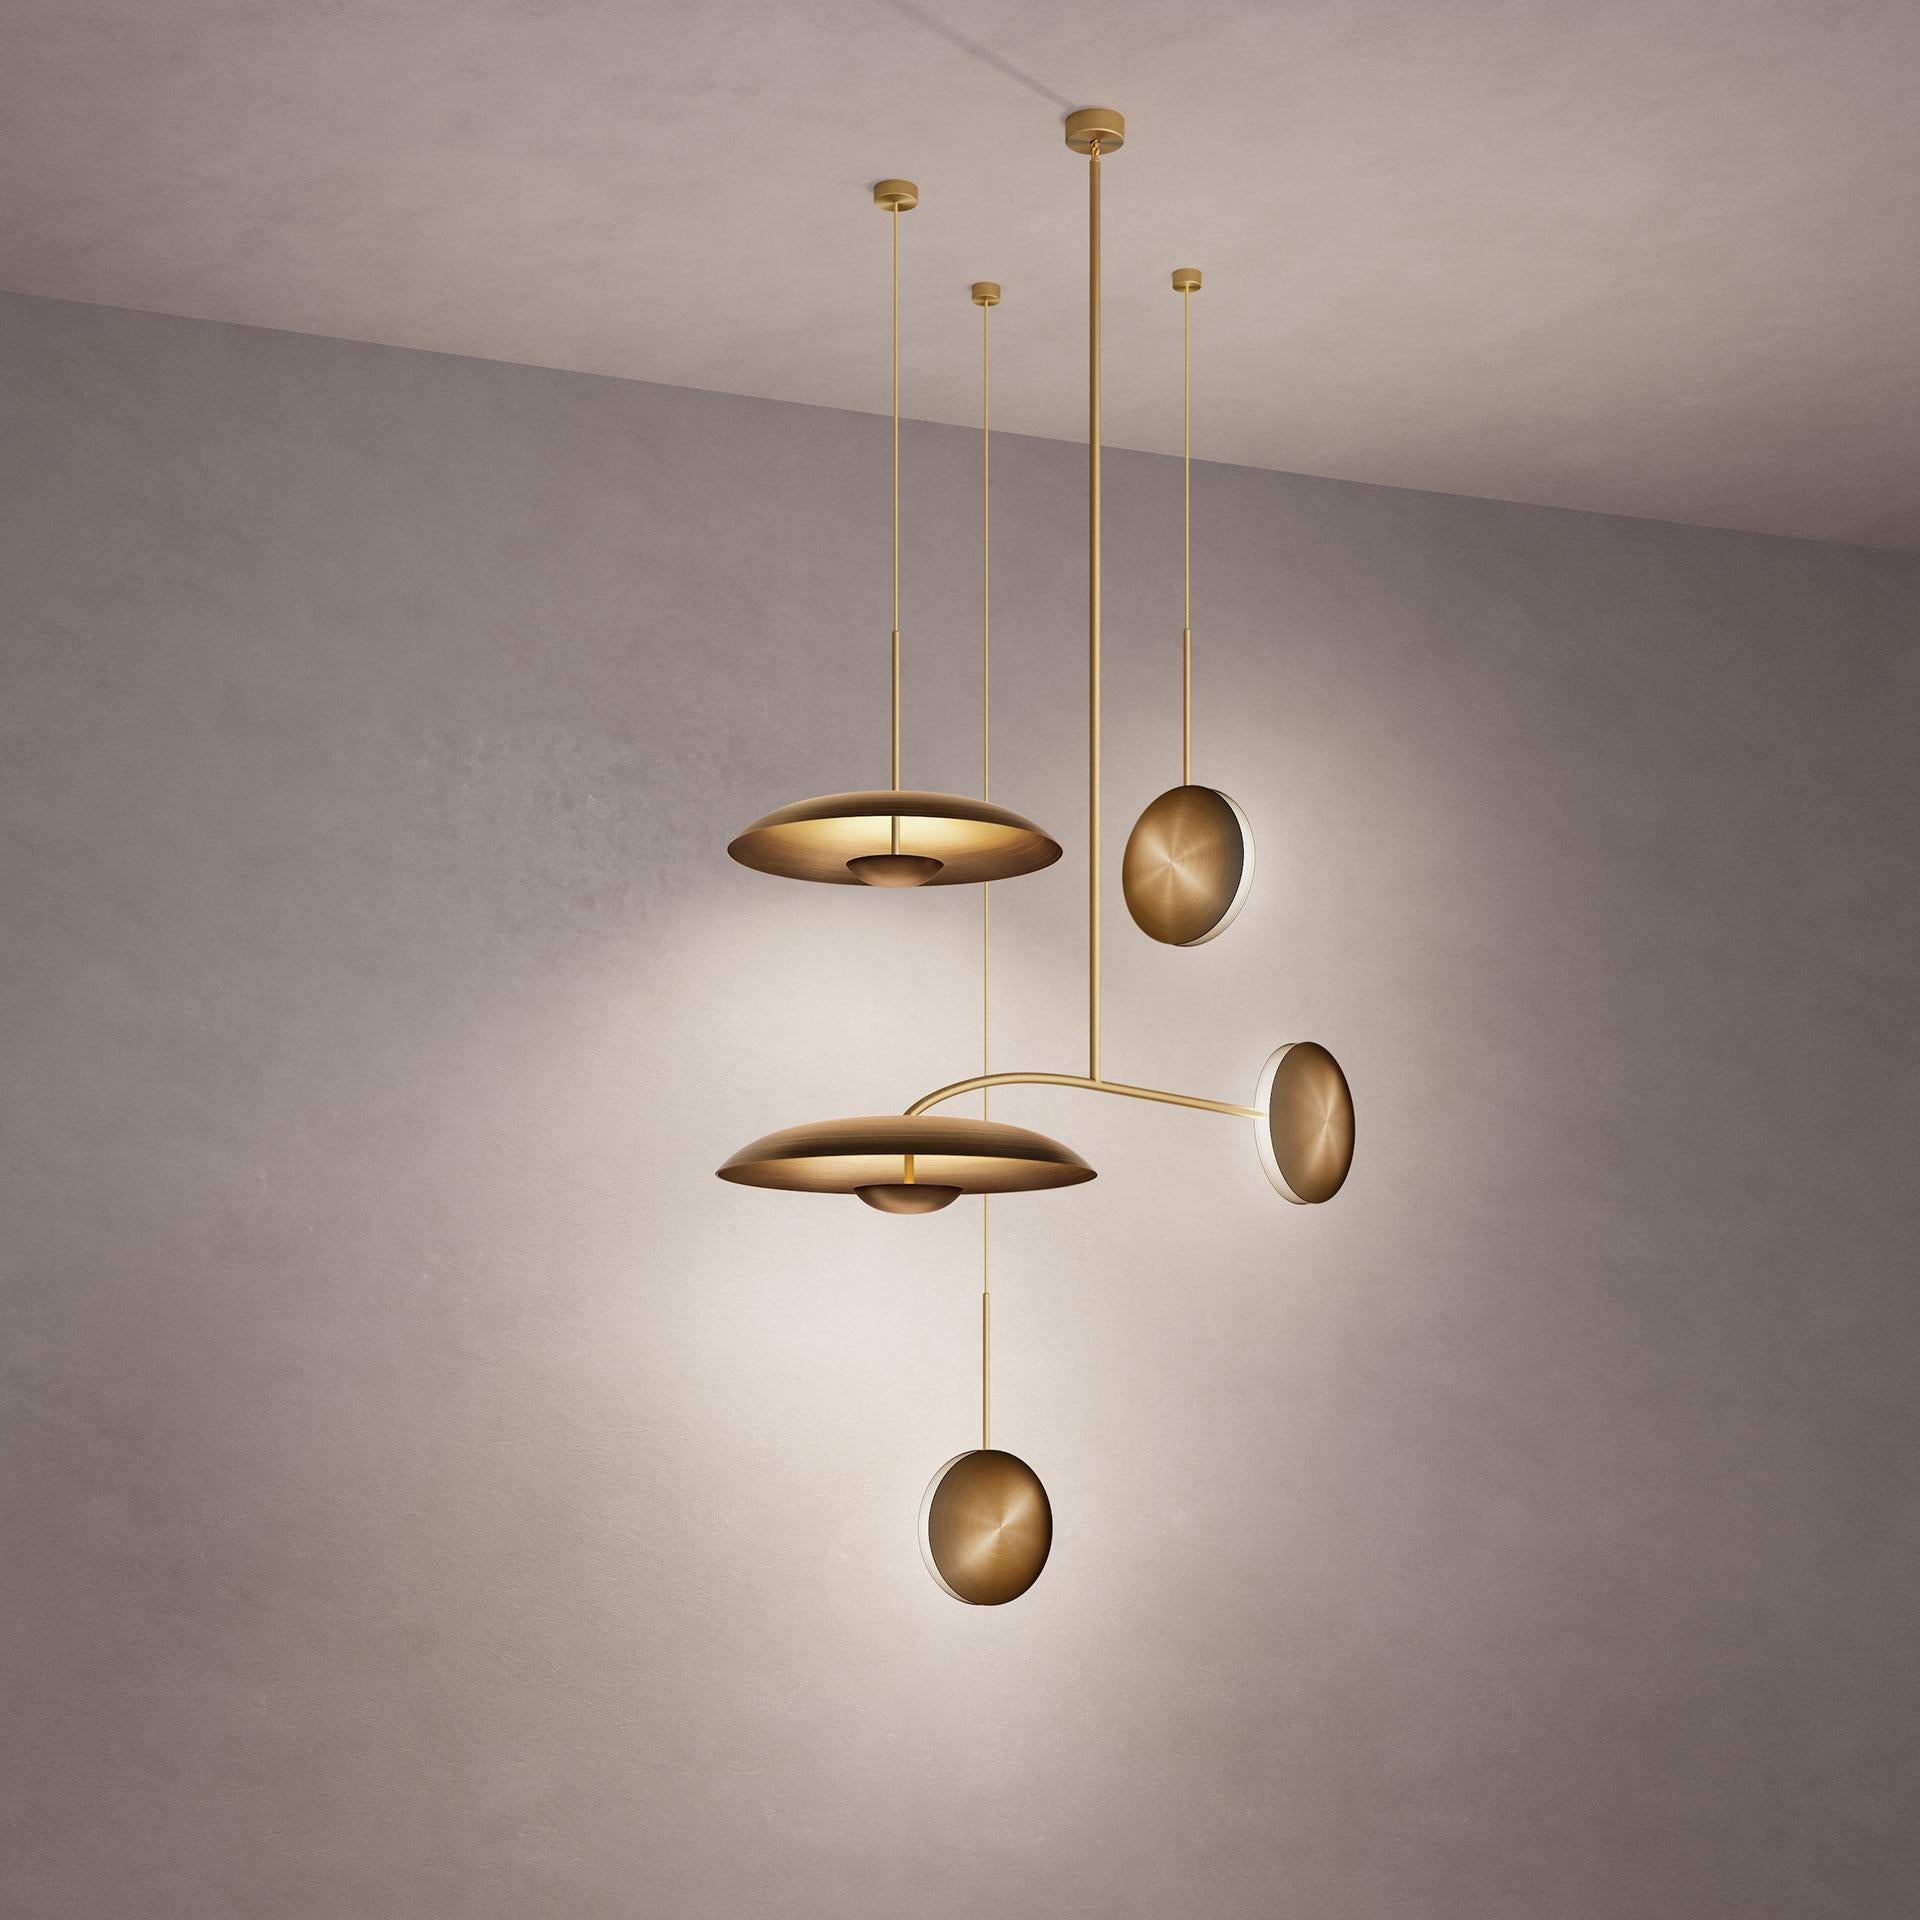 Inspired by planet-like shapes and textures, the Cosmic collection plays with both metal properties and a selection of patina finishes.
 
Finished in Atelier001’s signature bronze gradient patina Ore, the four lighting components are harmoniously